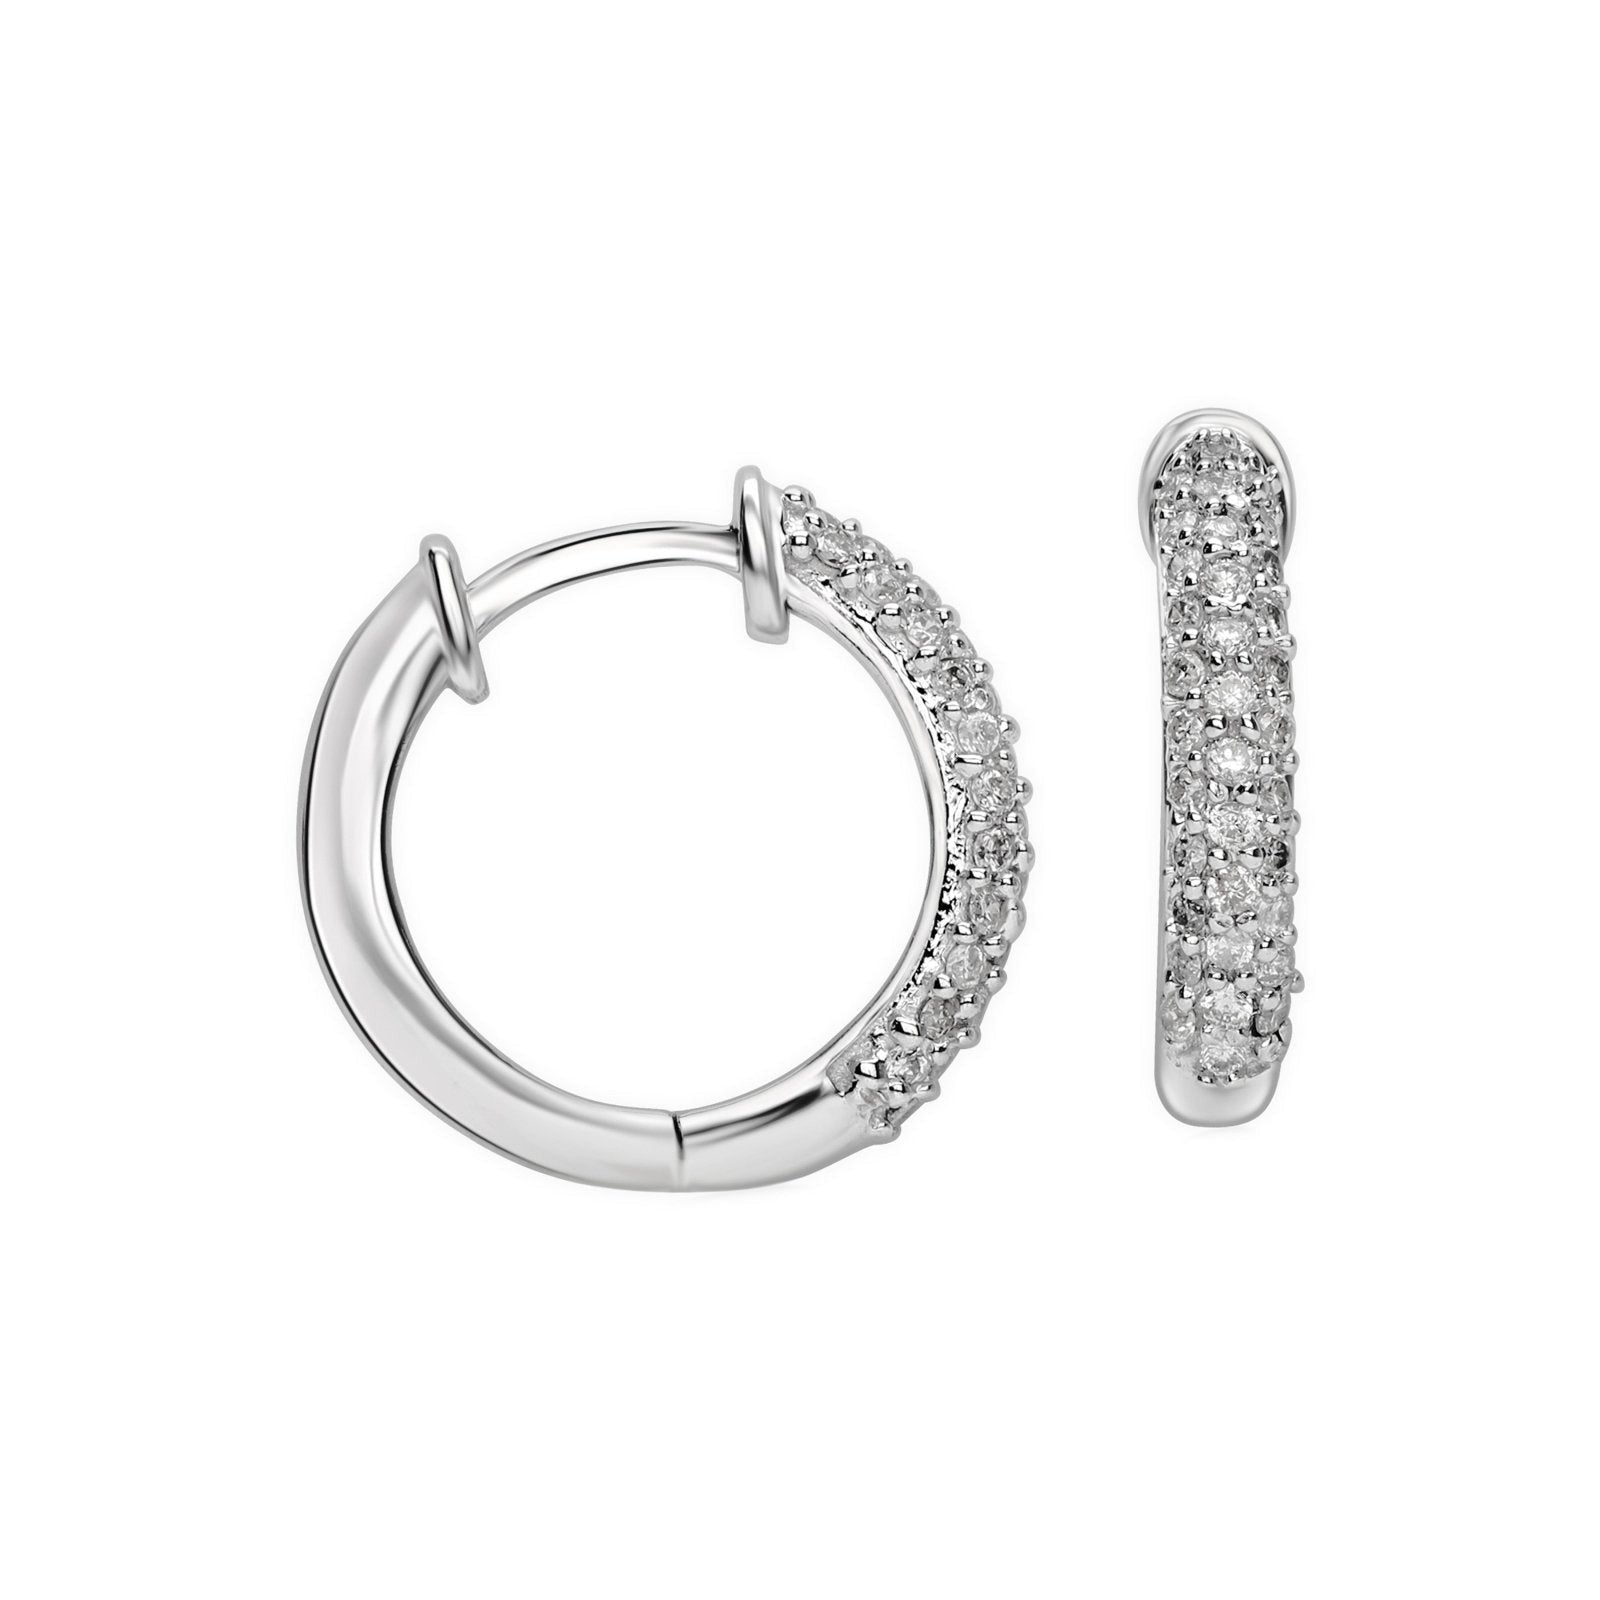 Diamond Dome Huggie Hoops in Solid 14k White Gold Earrings Estella Collection #product_description# 14k cartilage hoop Colorless Gemstone #tag4# #tag5# #tag6# #tag7# #tag8# #tag9# #tag10#